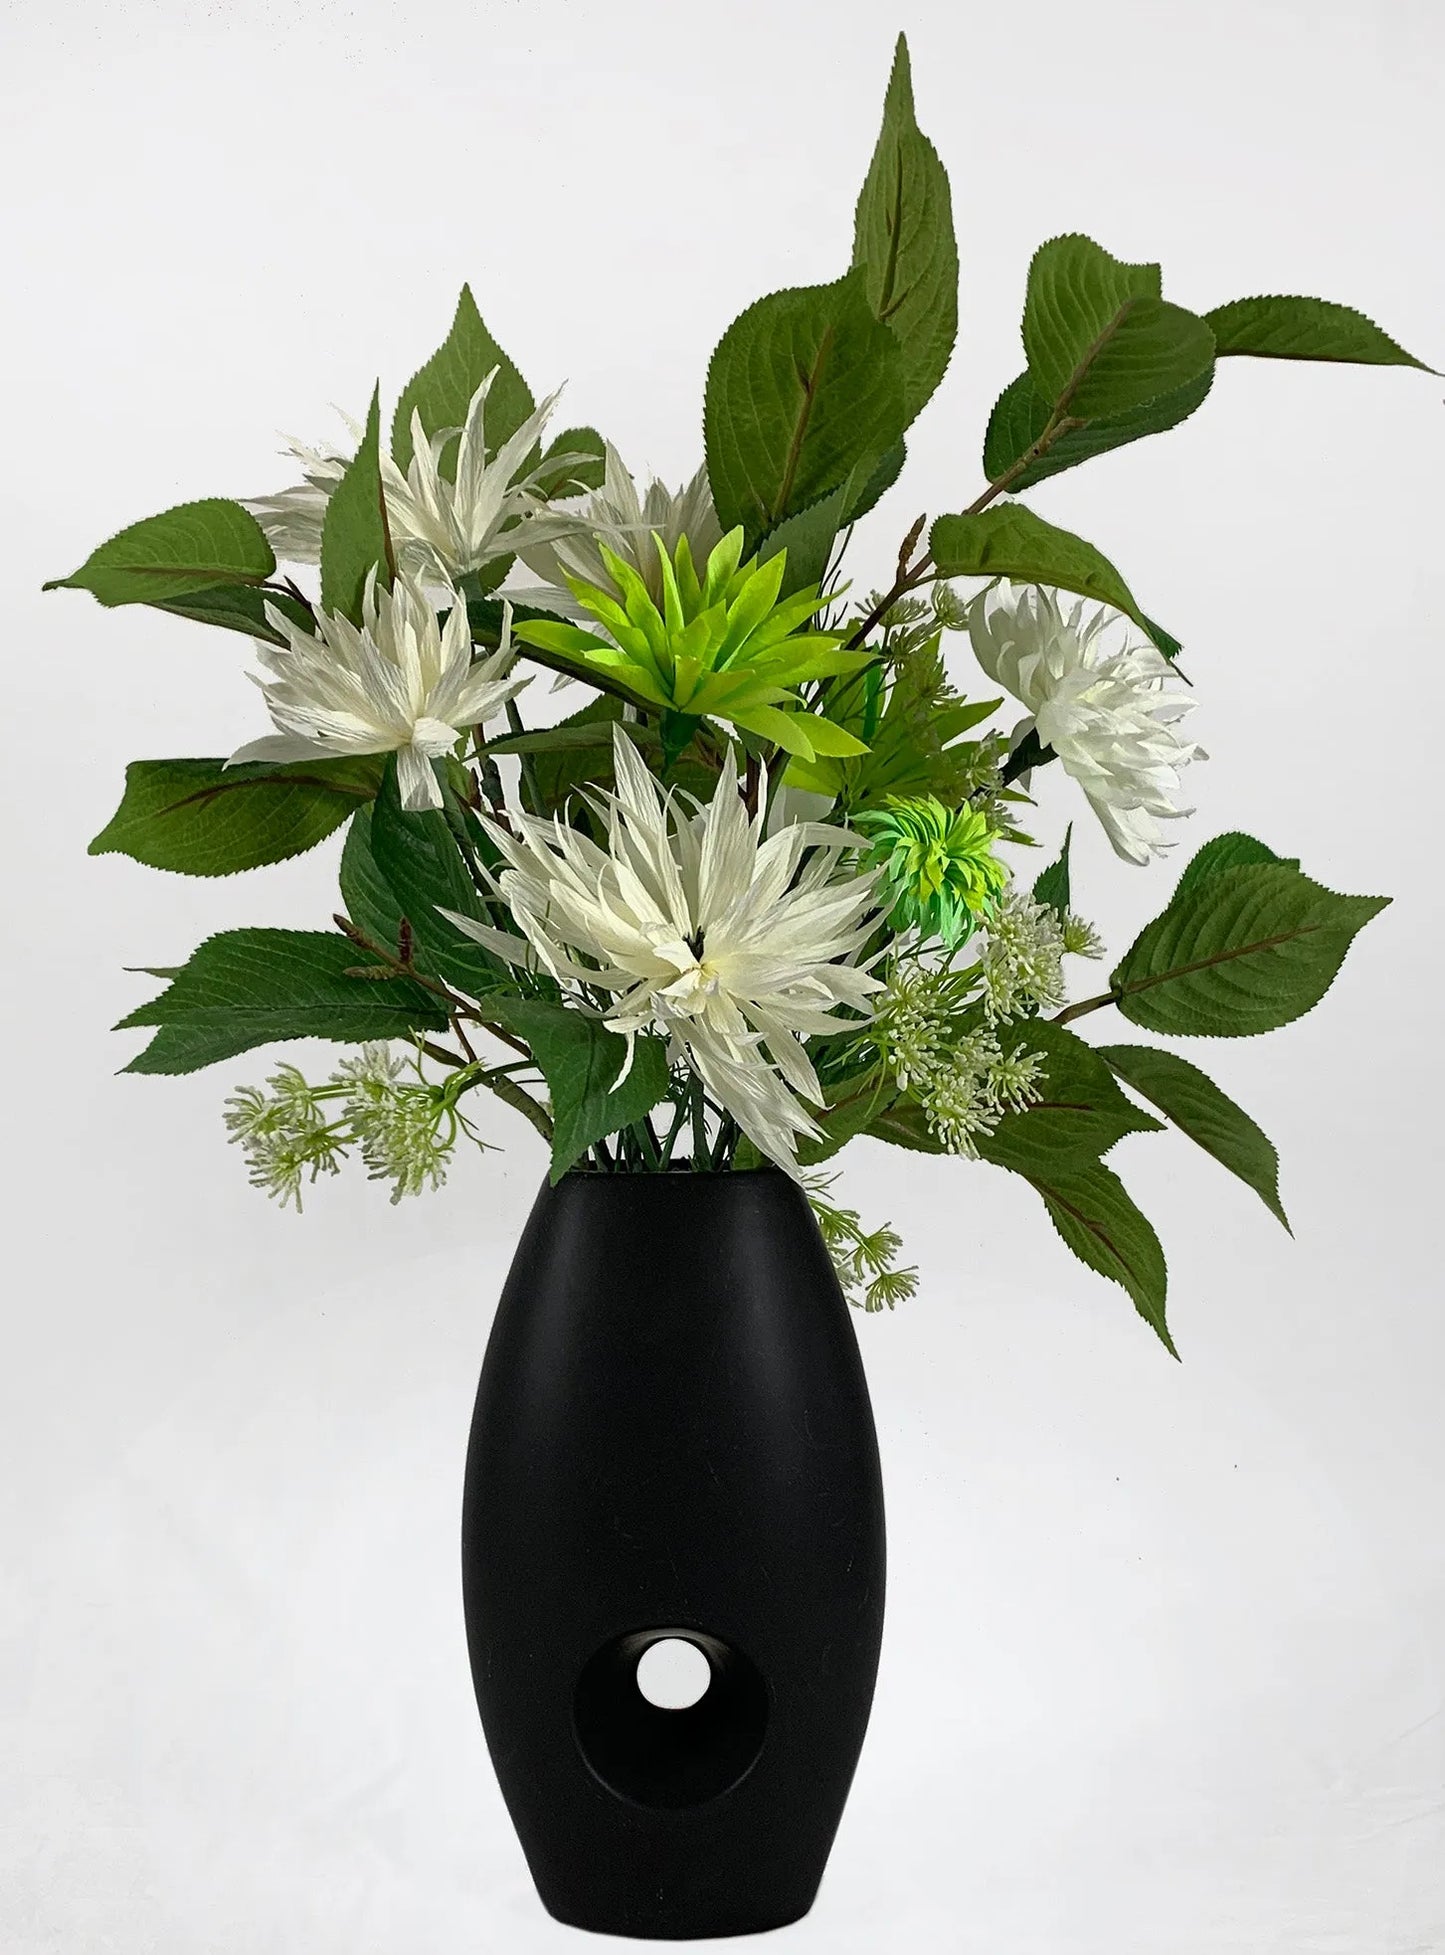 Verdant foliage contrasts with spider chrysanthemums to deliver a dramatic focus piece with bright green and ivory dahlias in a stylish black vase.  SIZE:  W50xH70cm  *Found Object – may not mean a new vessel/vase, but one which has been ‘found’ during our searches.  Please note: Sale price is for pictured item (Floor model) - ONE ONLY.